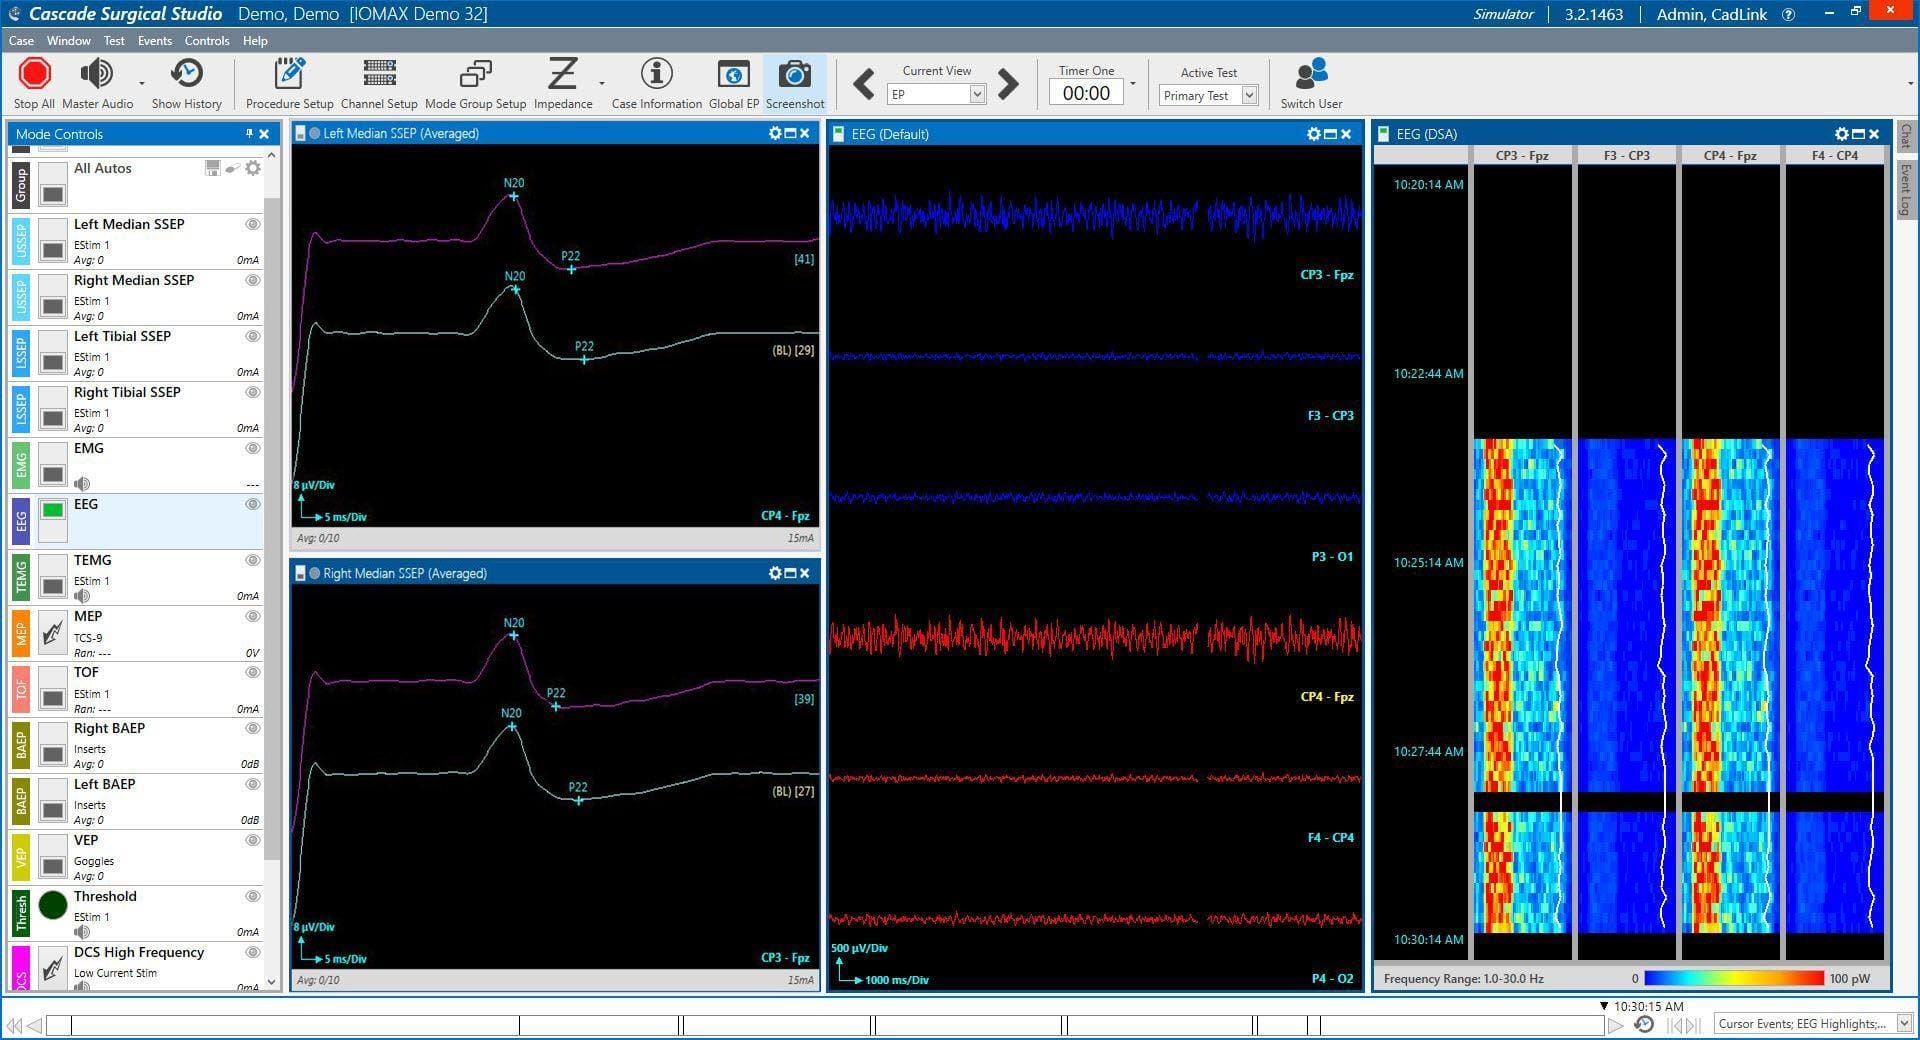 ionm software Monitor all Modalities IONM software